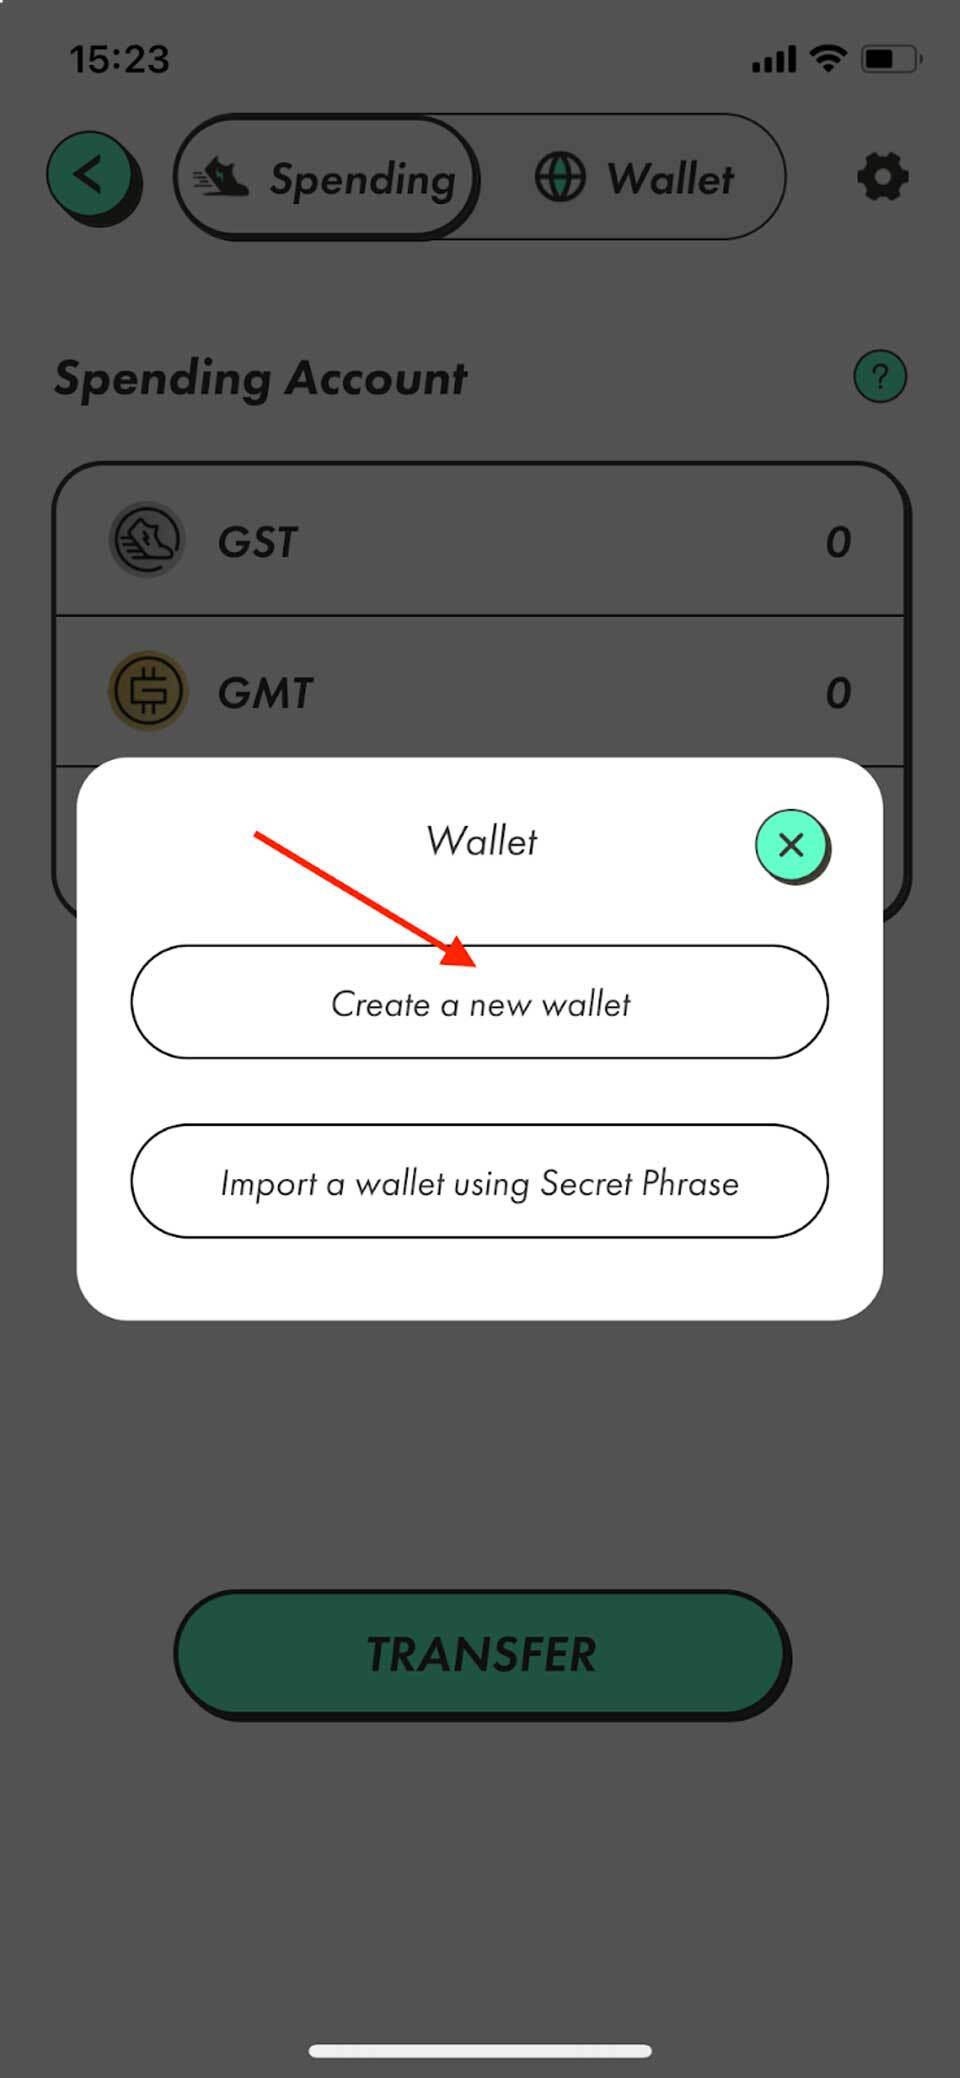 Chọn “Create a new wallet”